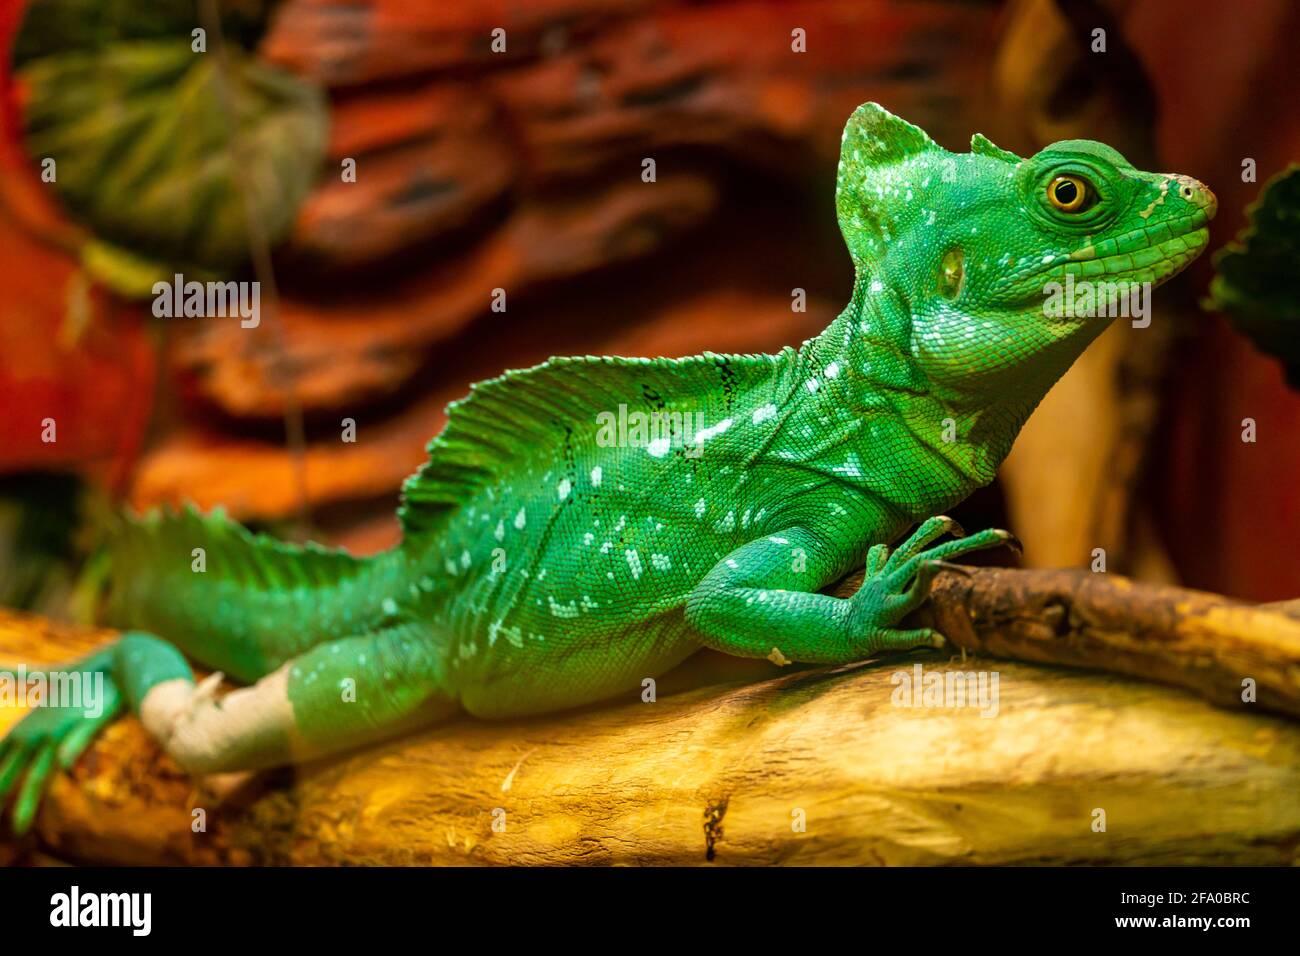 Chameleon disguises itself among the leaves of trees in the rainforest. Green chameleon merges with the environment Stock Photo